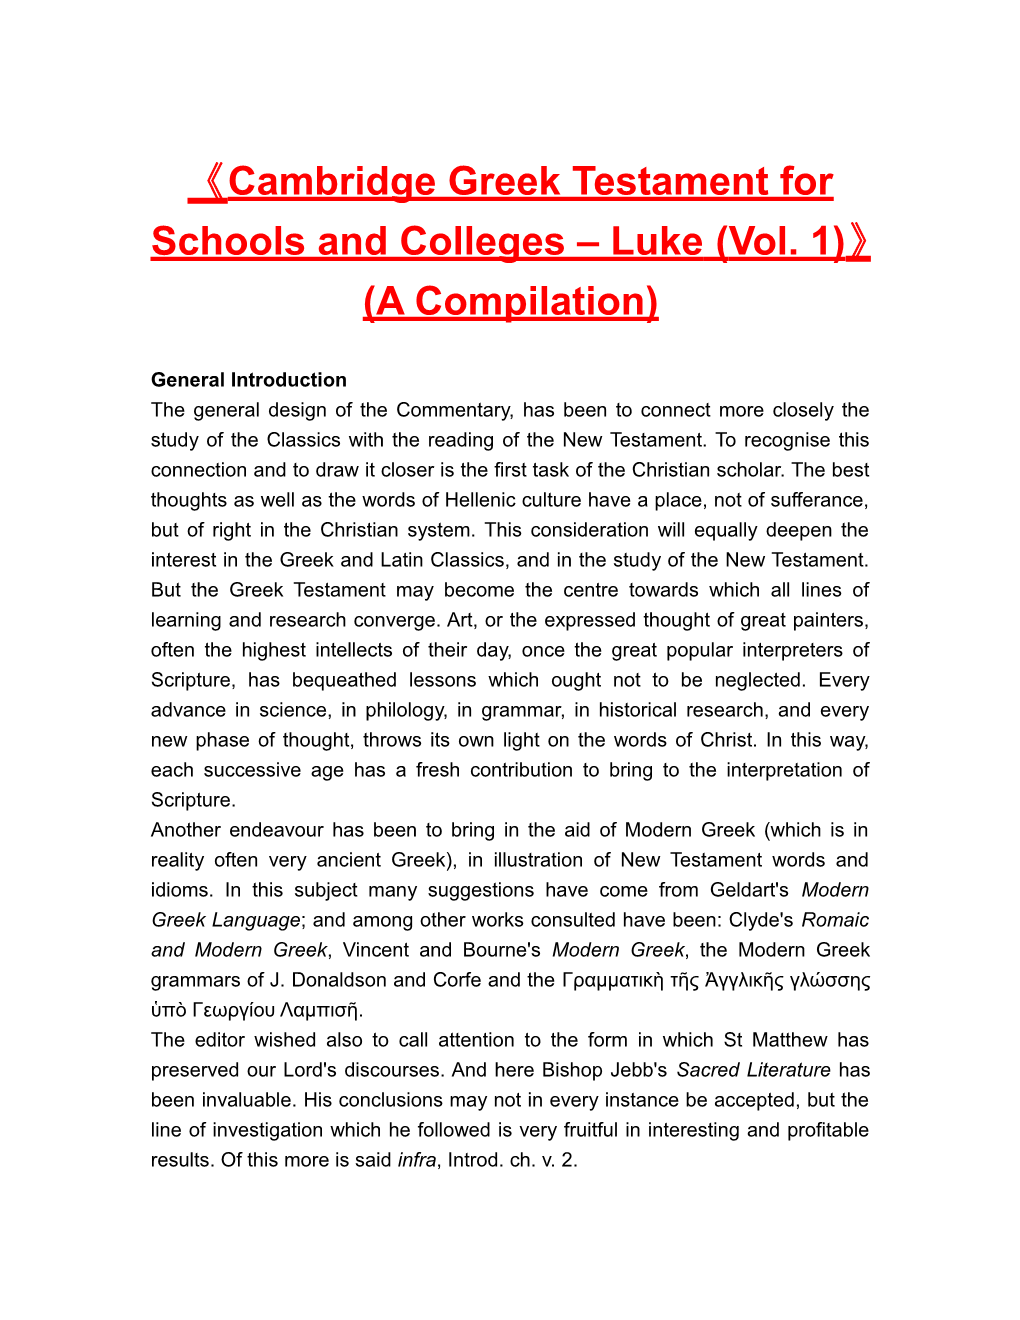 Cambridge Greek Testament for Schools and Colleges Luke (Vol. 1) (A Compilation)